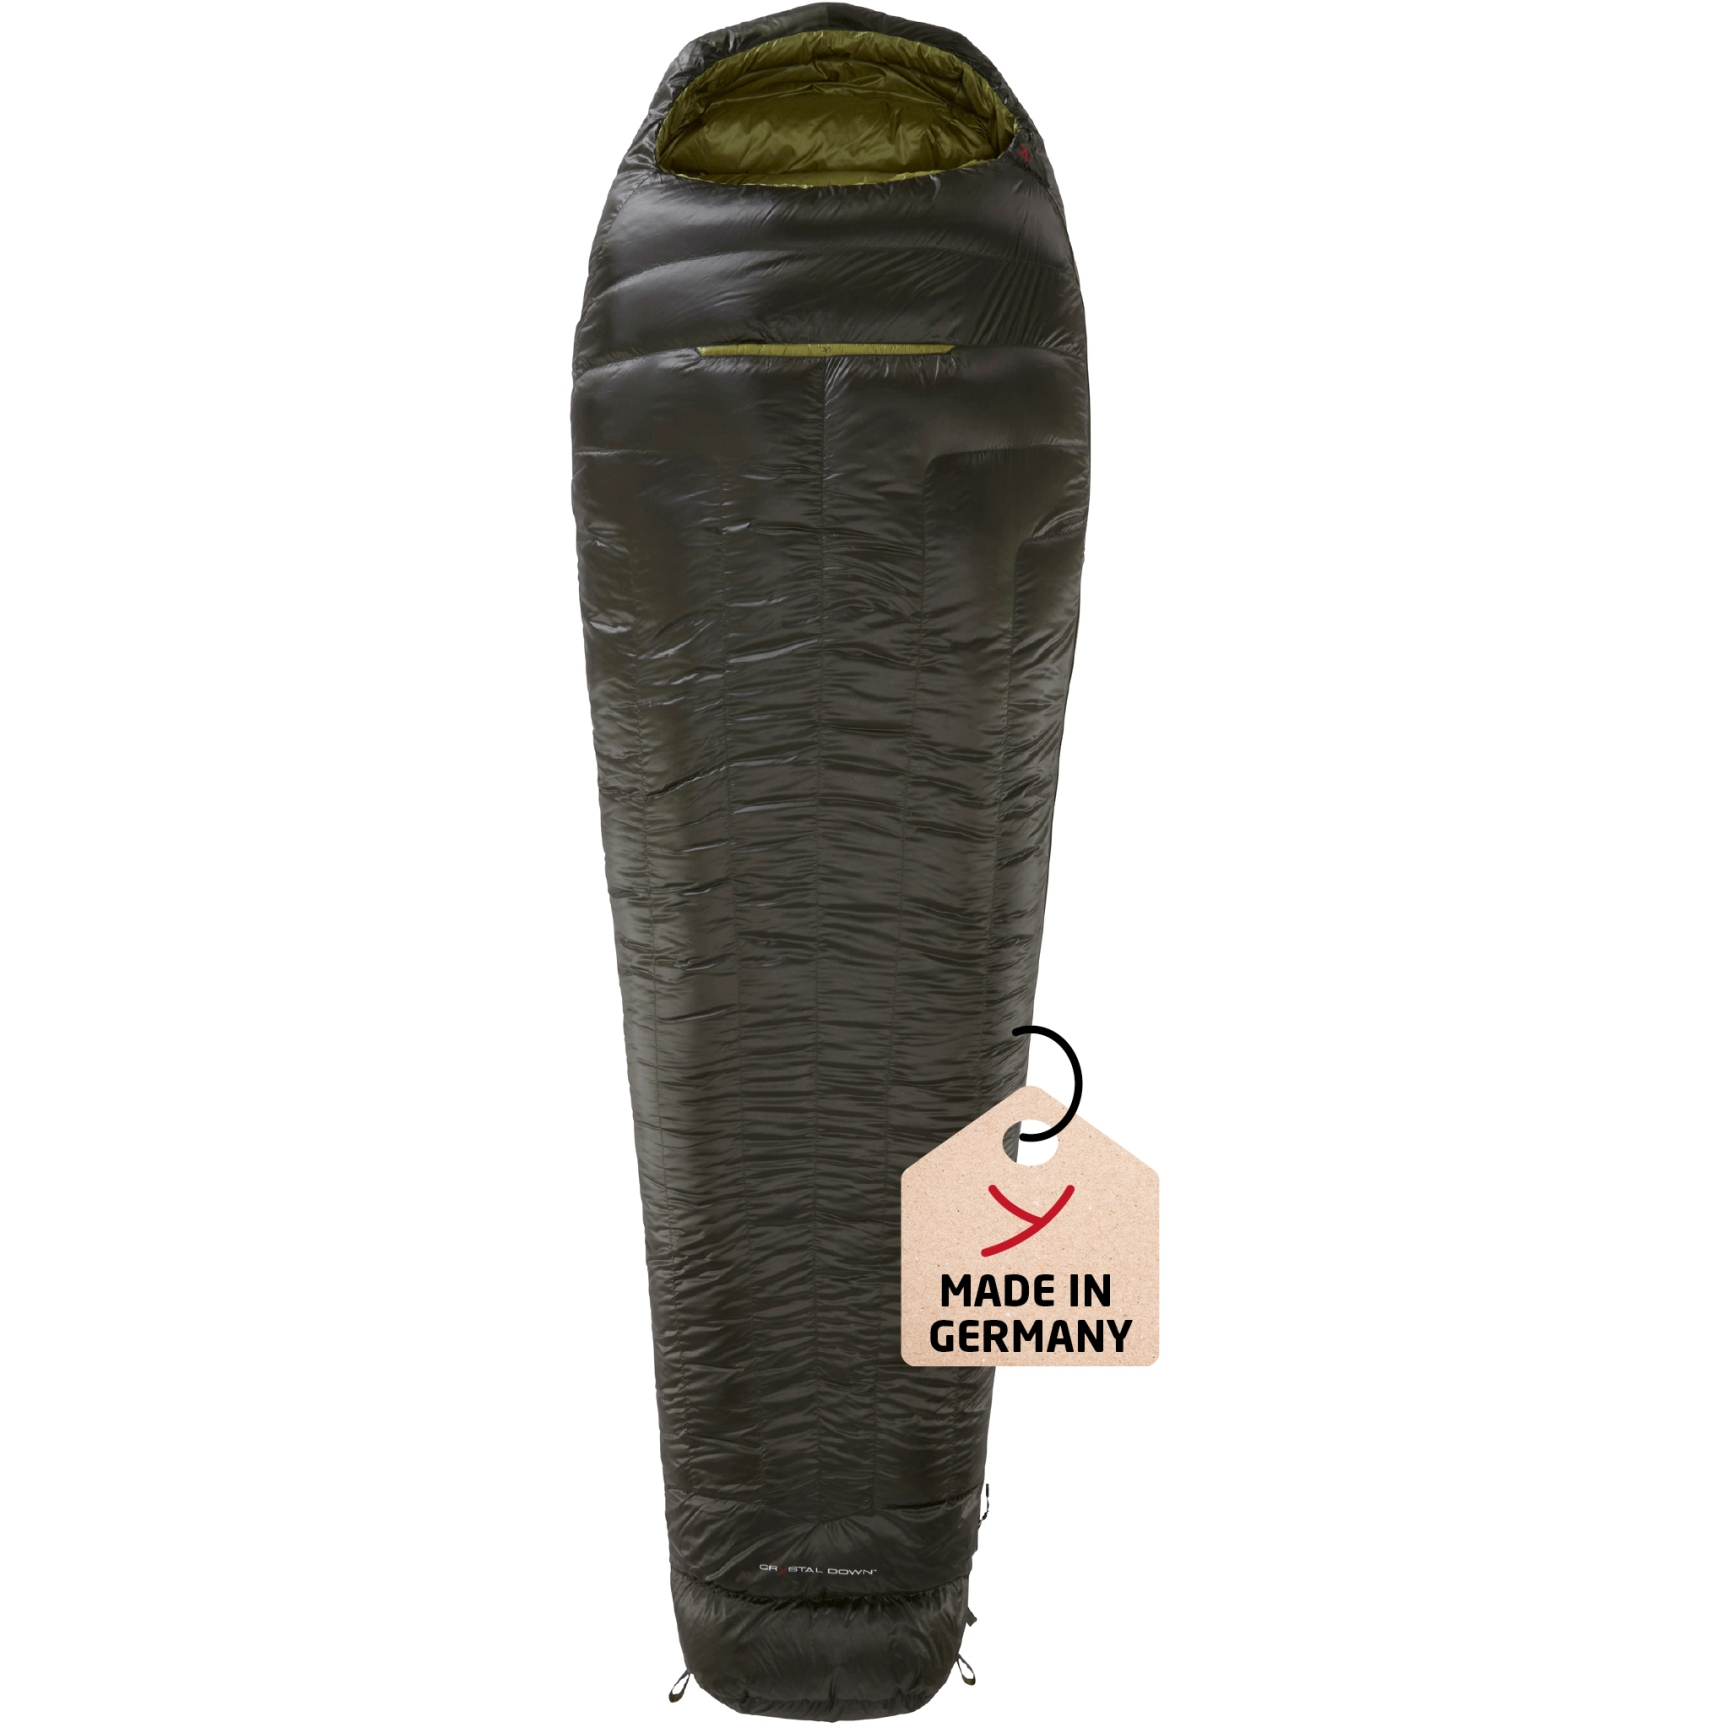 Picture of Y by Nordisk Balance 600 L Sleeping Bag - forest night/green moss